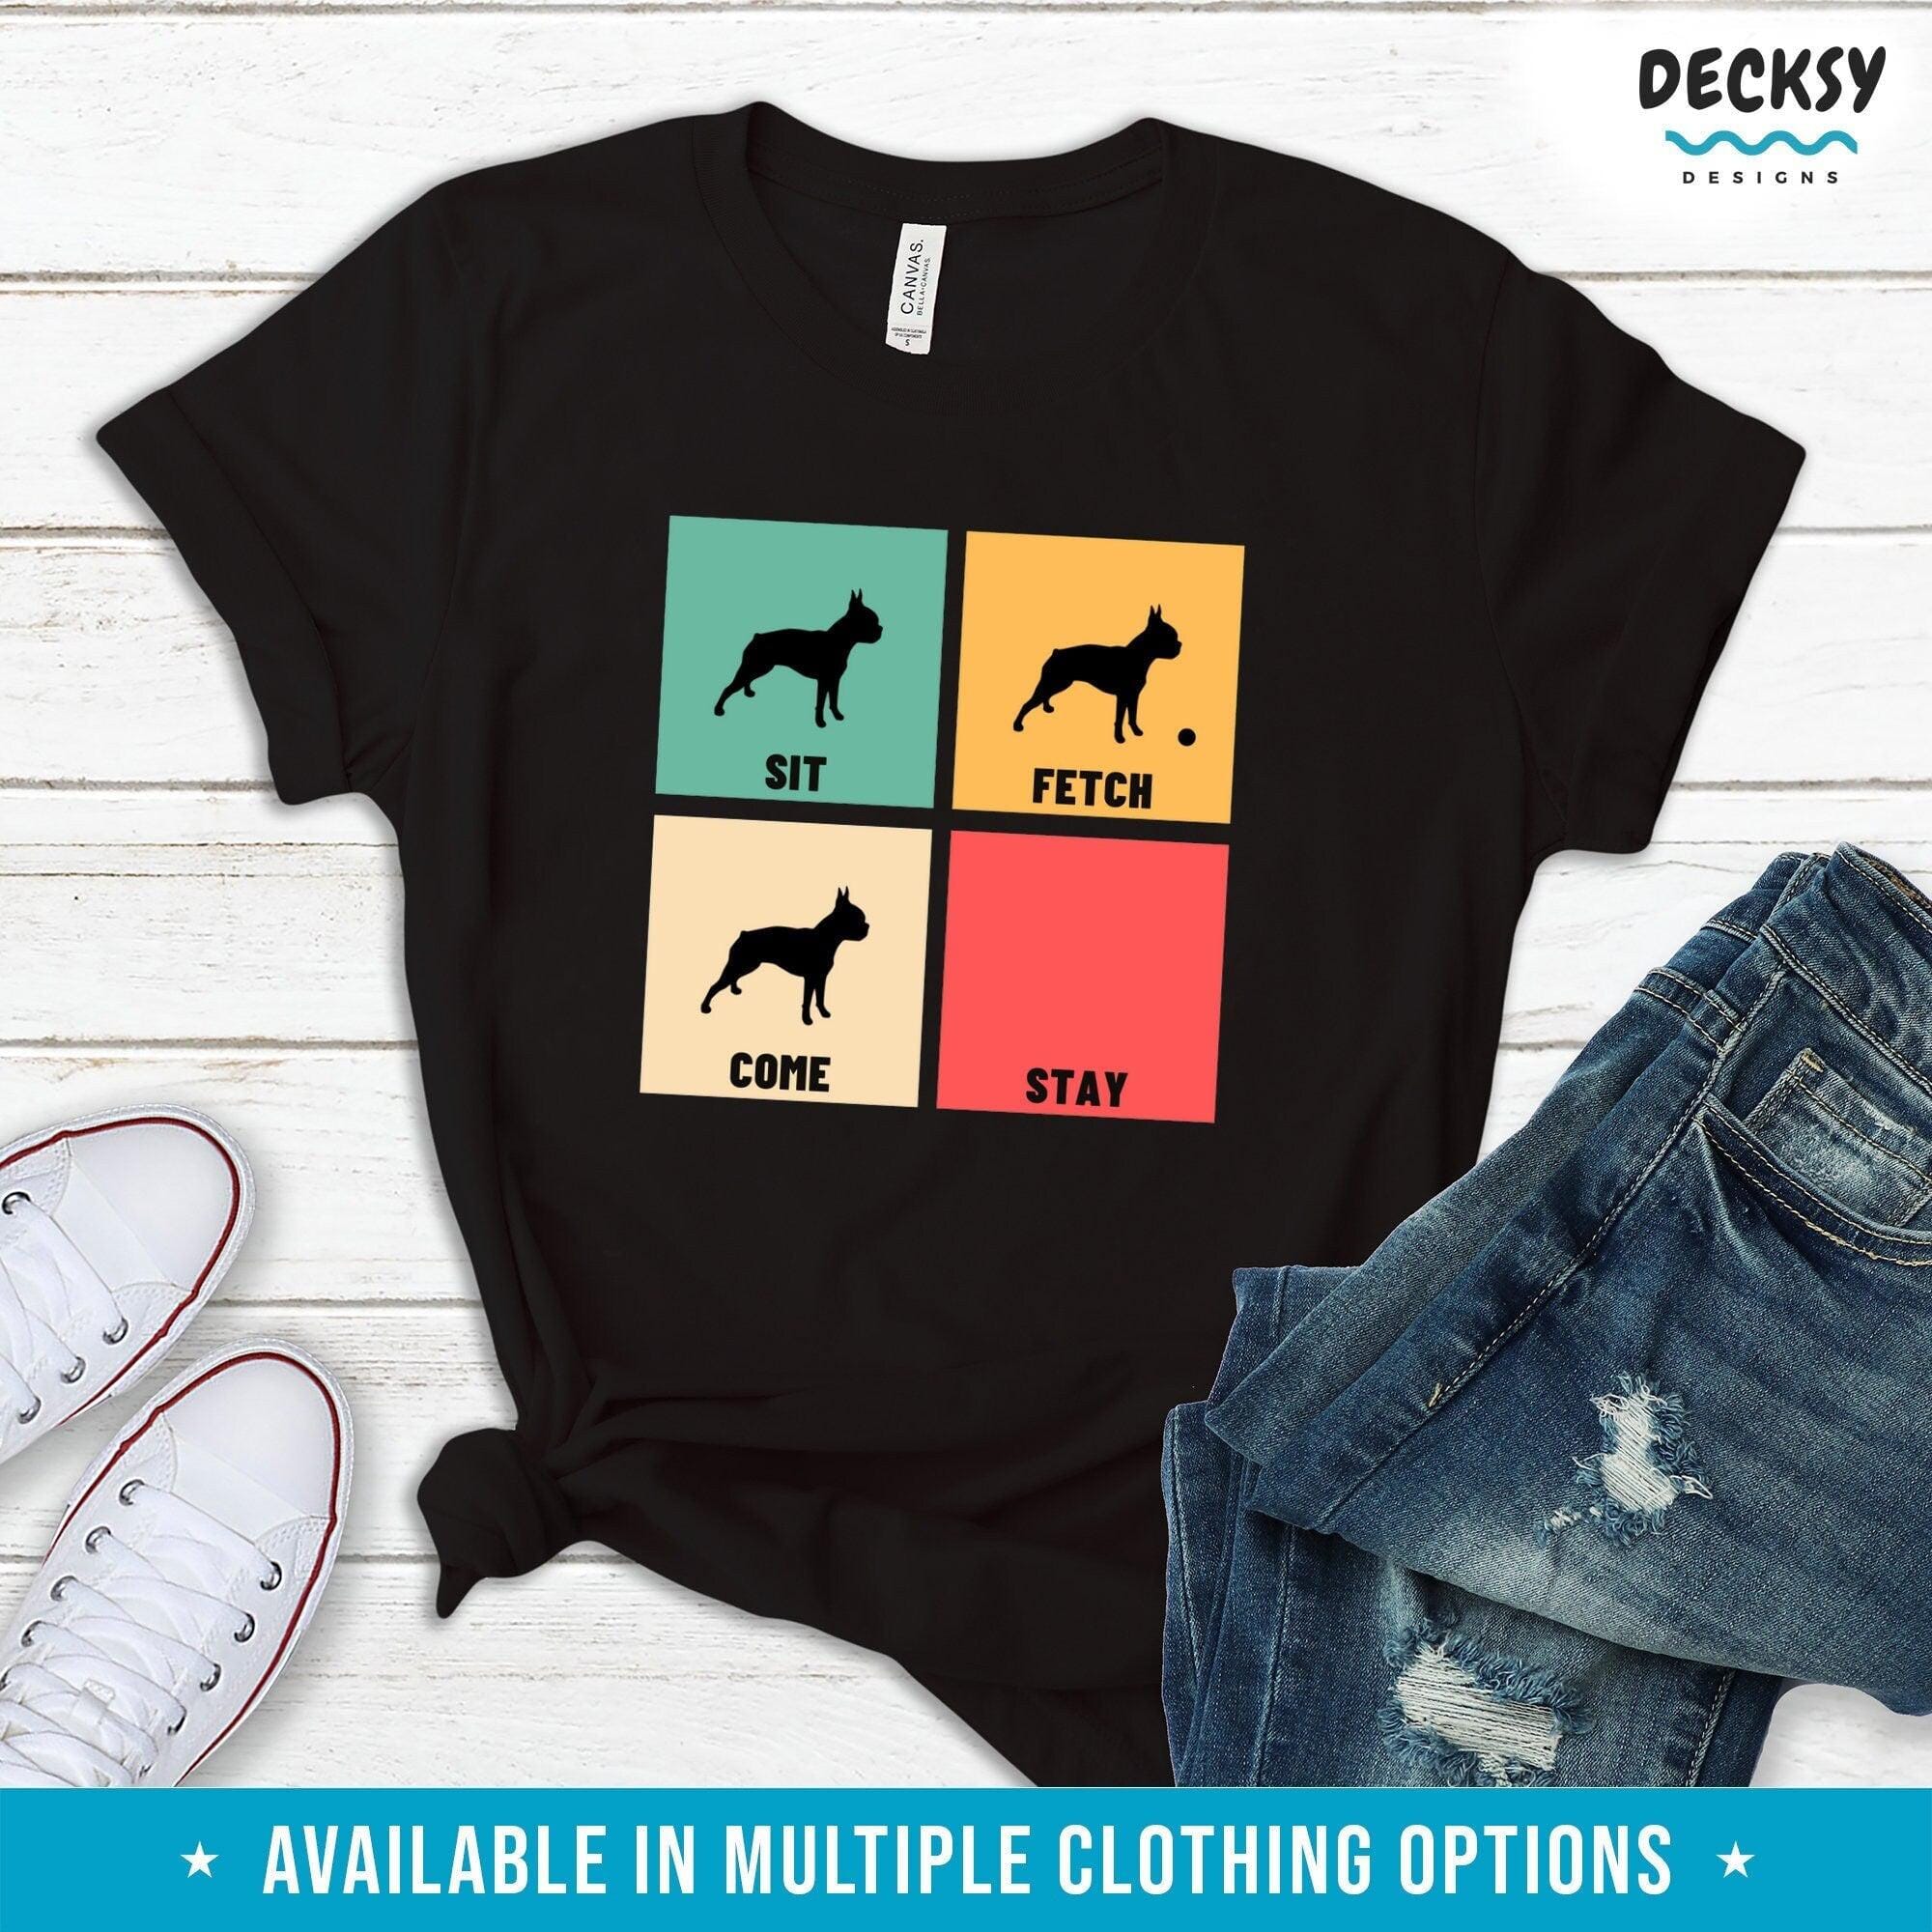 Boston Terrier Shirt, Bostie Lover Gift-Clothing:Gender-Neutral Adult Clothing:Tops & Tees:T-shirts:Graphic Tees-DecksyDesigns